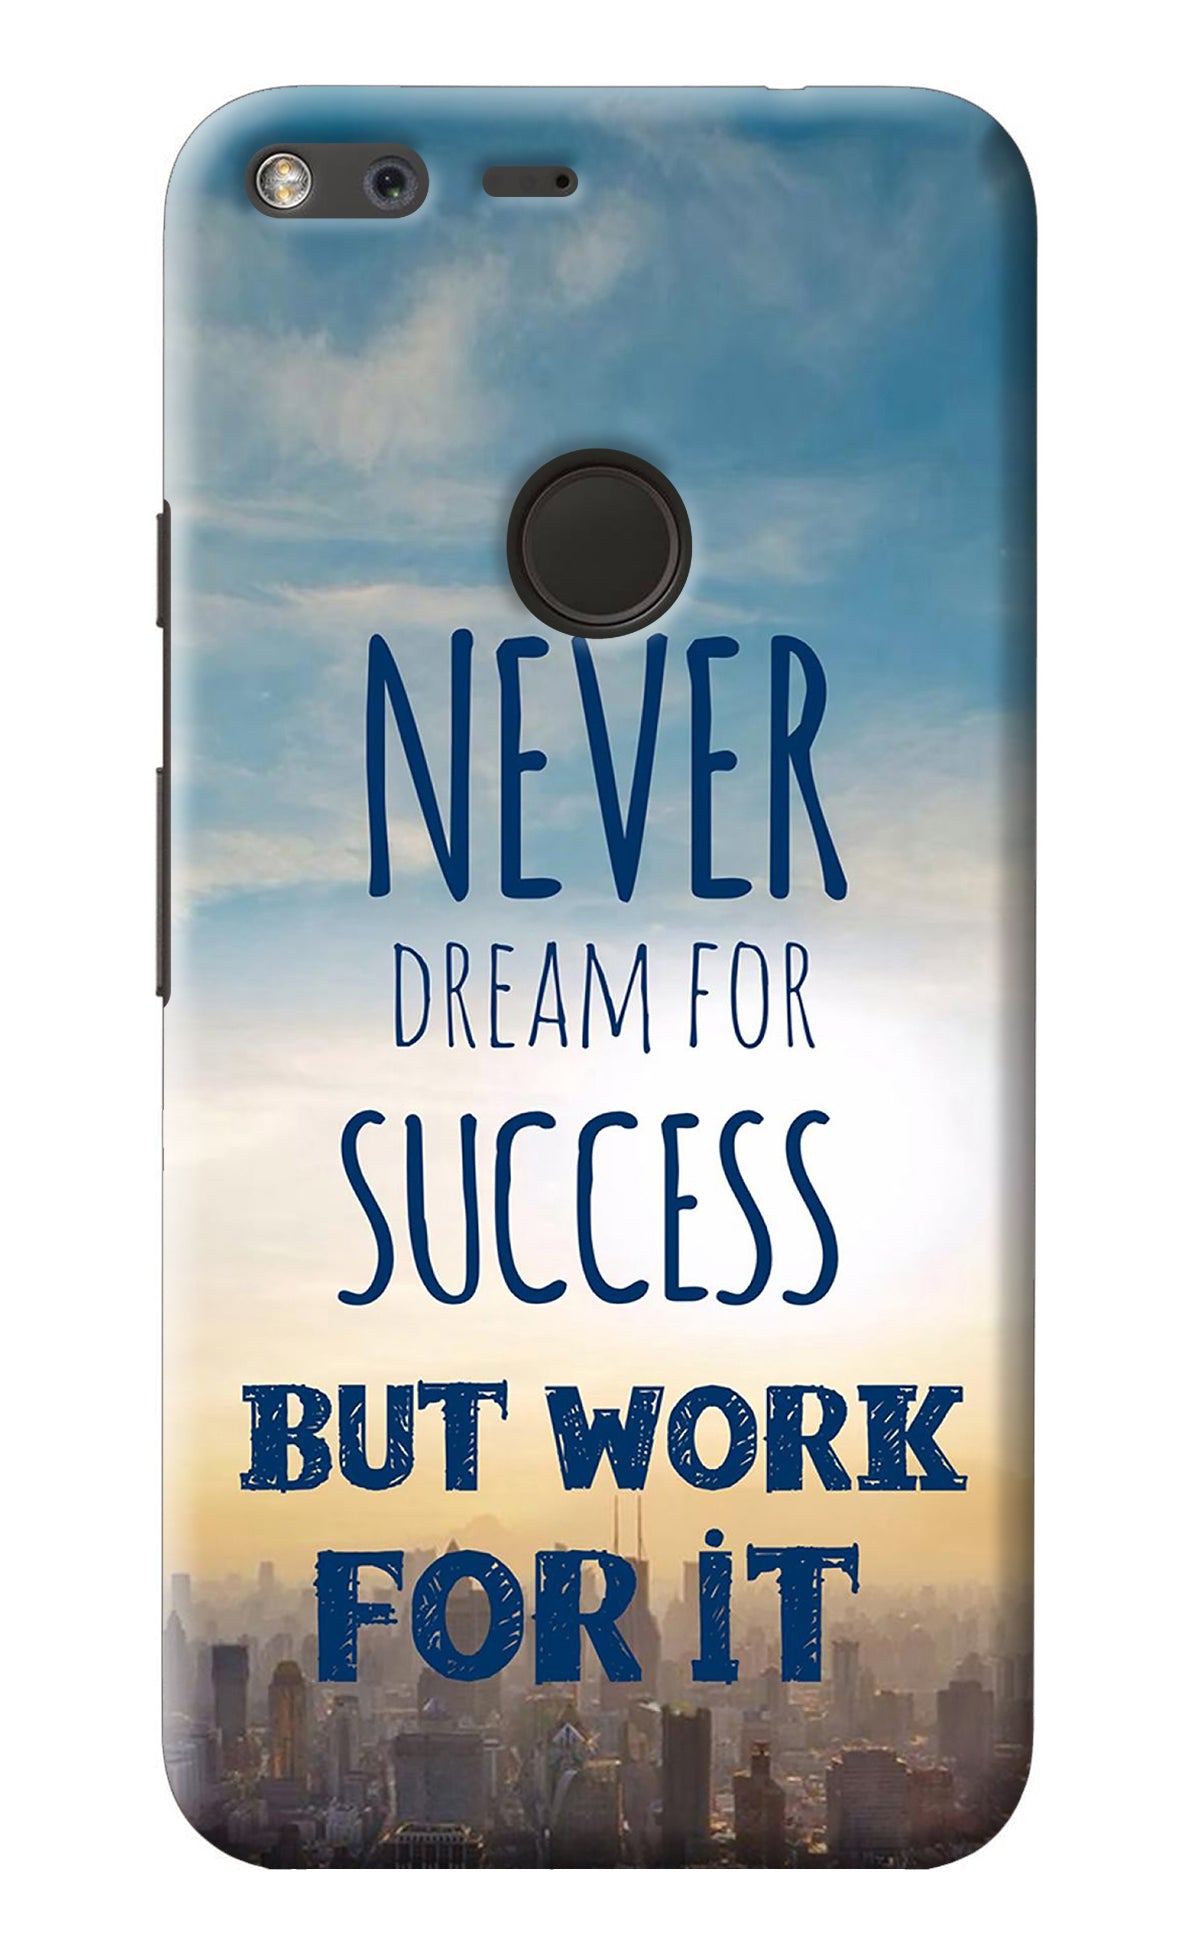 Never Dream For Success But Work For It Google Pixel XL Back Cover